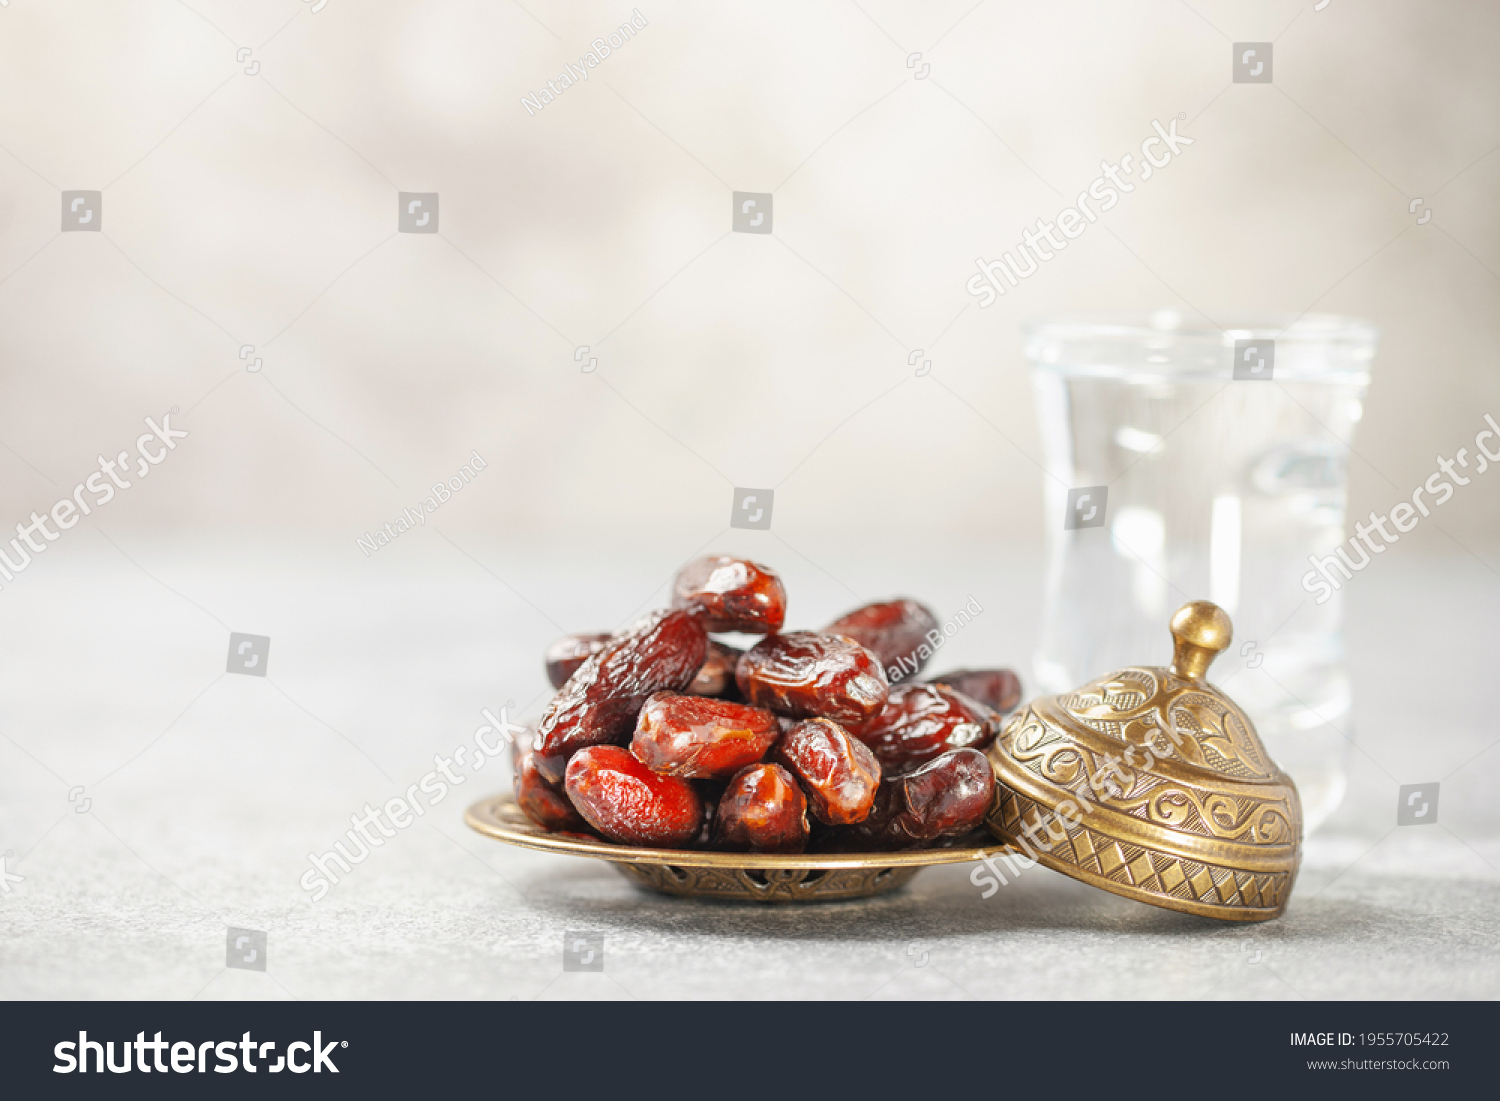 A glass of water and dry dates on saucer ready to eat for iftar time. Islamic religion and ramadan concept. #1955705422